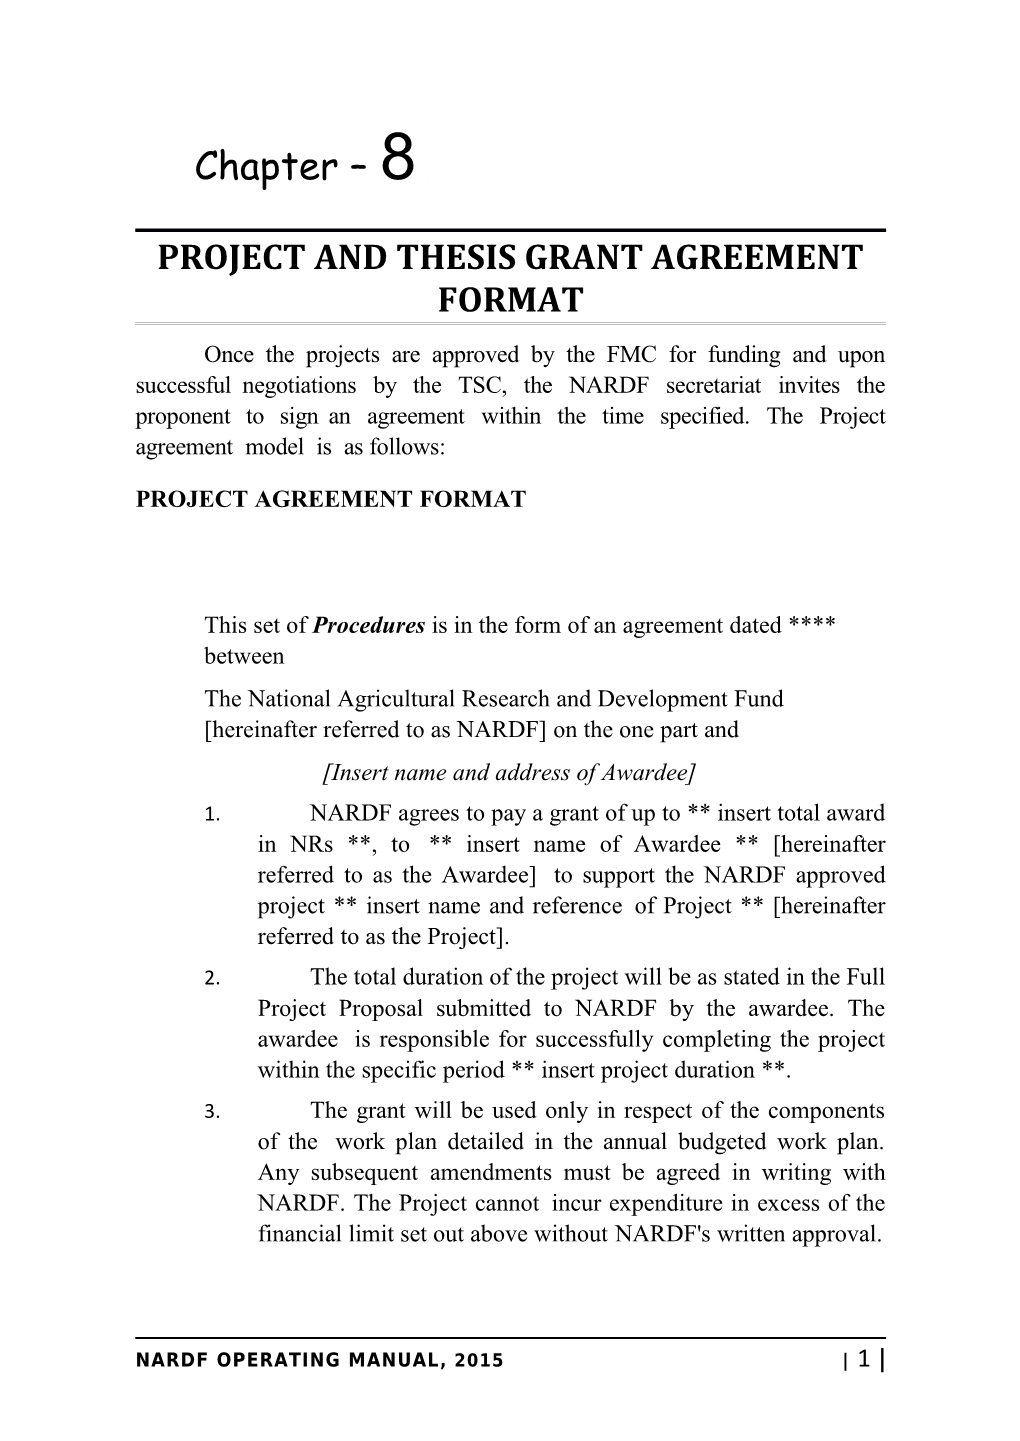 Project and Thesis Grant Agreement Format